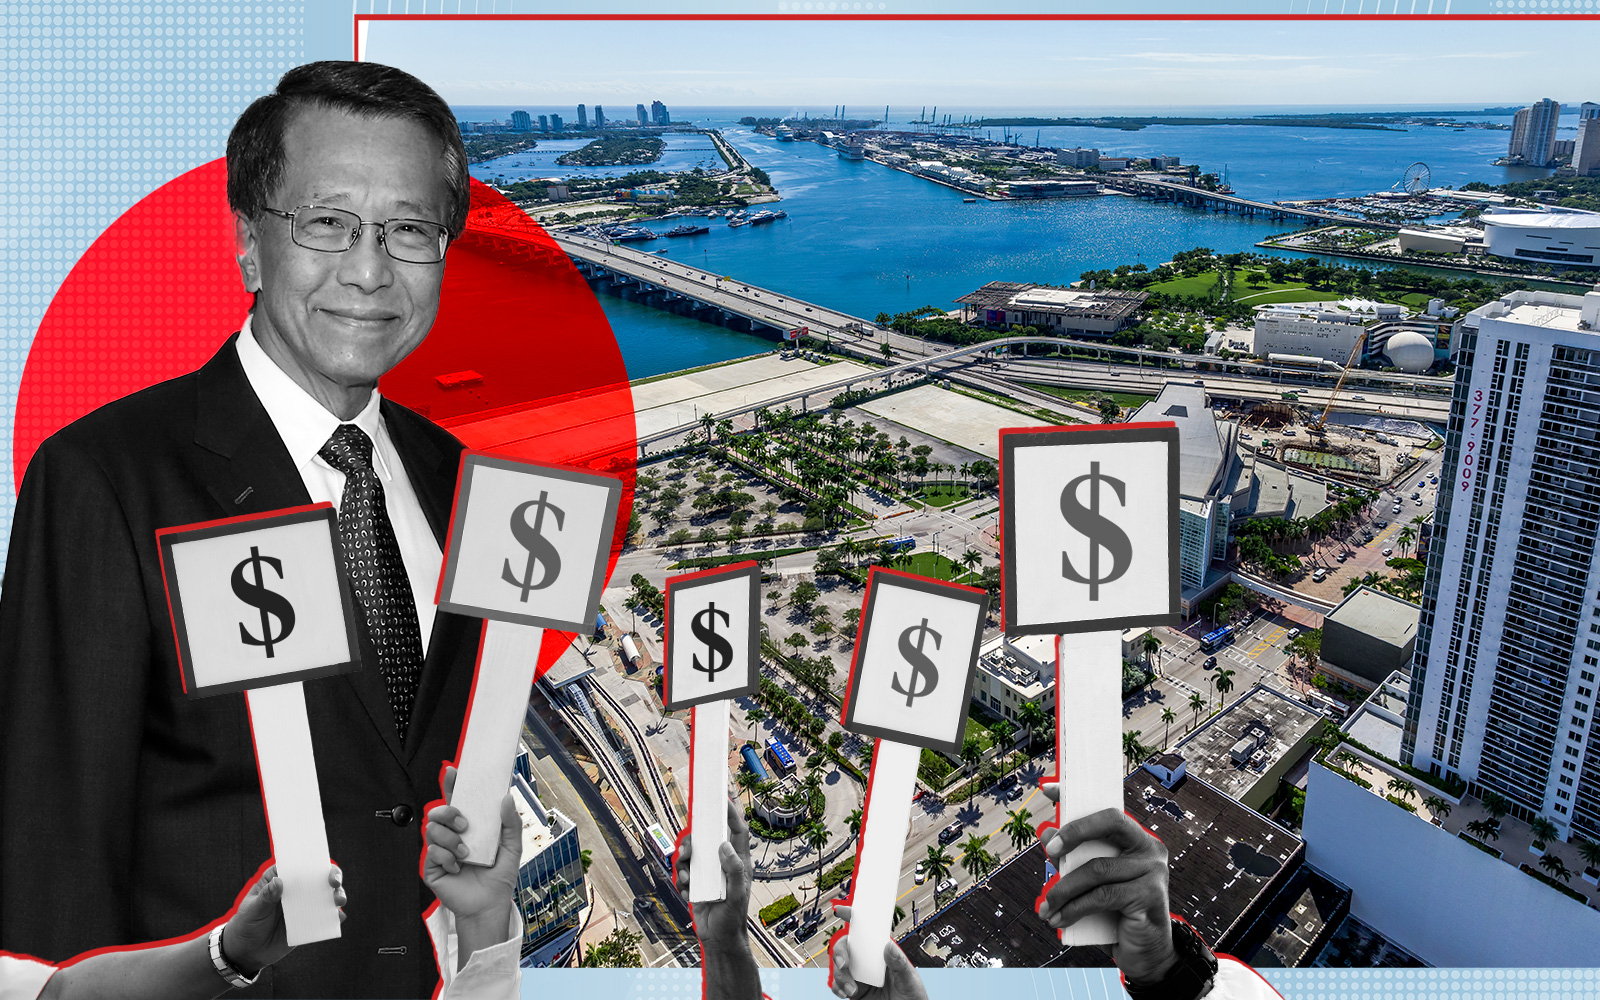 Casino Operator Genting to List Miami Property With $1 Billion-Plus Asking  Price - Bloomberg